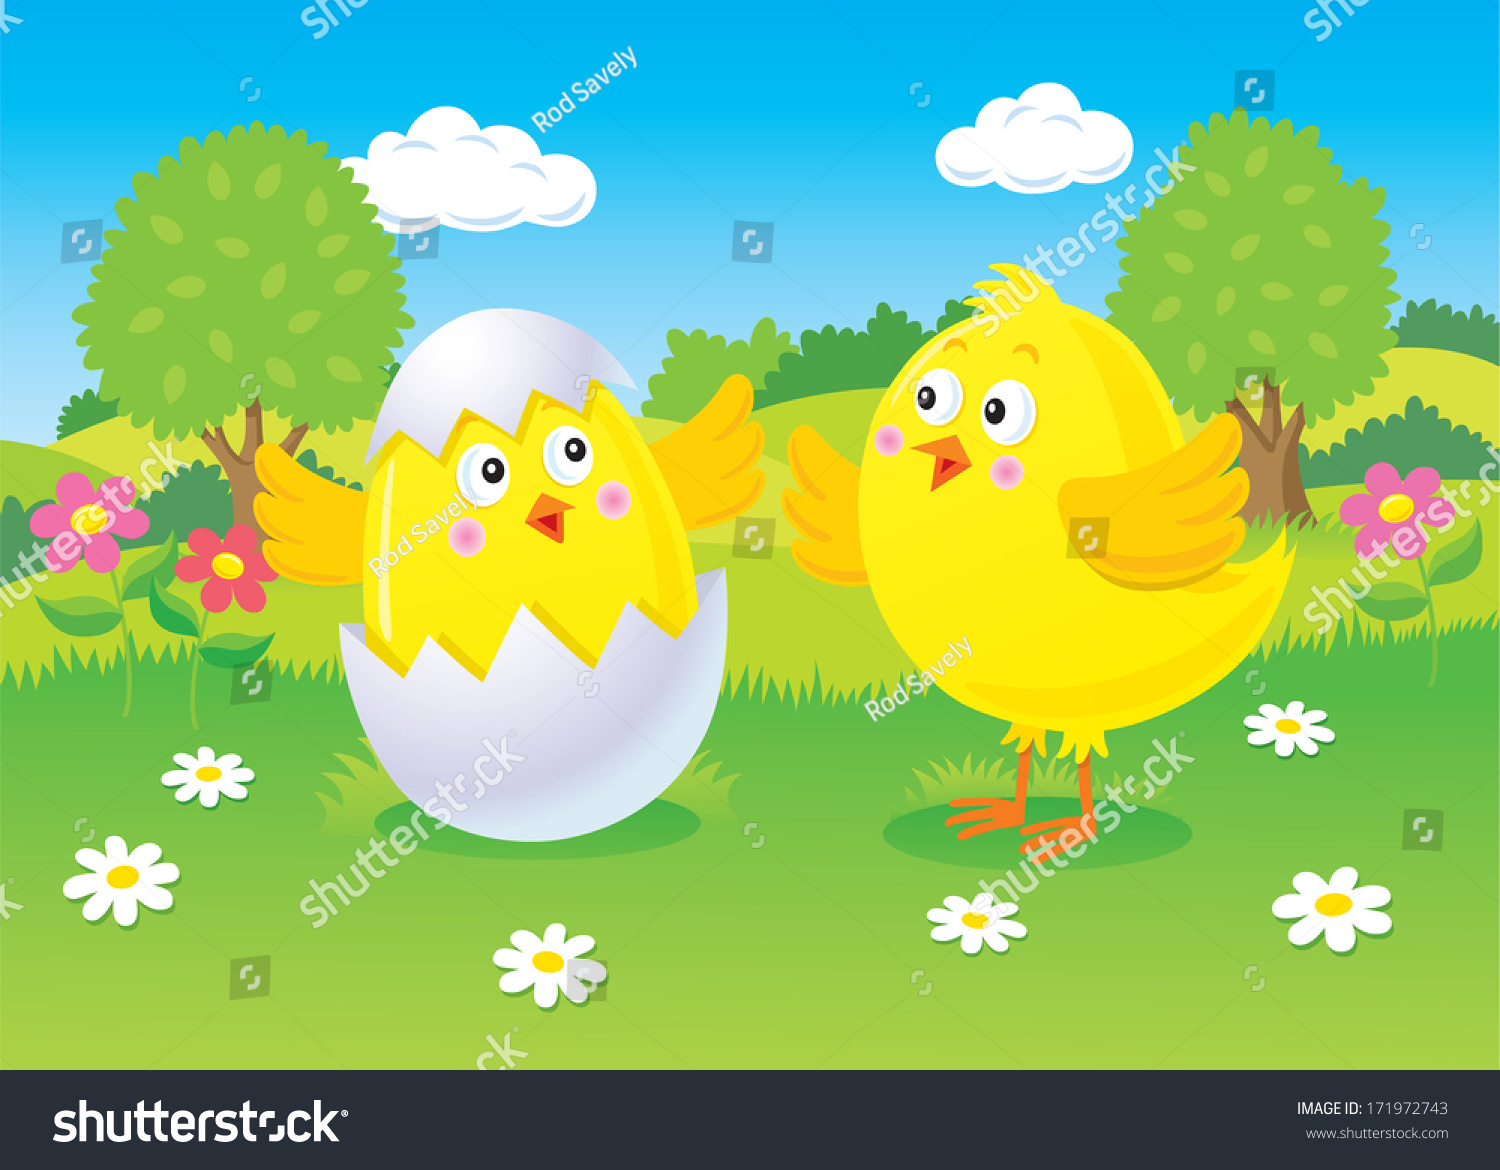 Baby Chick Watching Another Baby Chick Stock Vector (Royalty Free ...